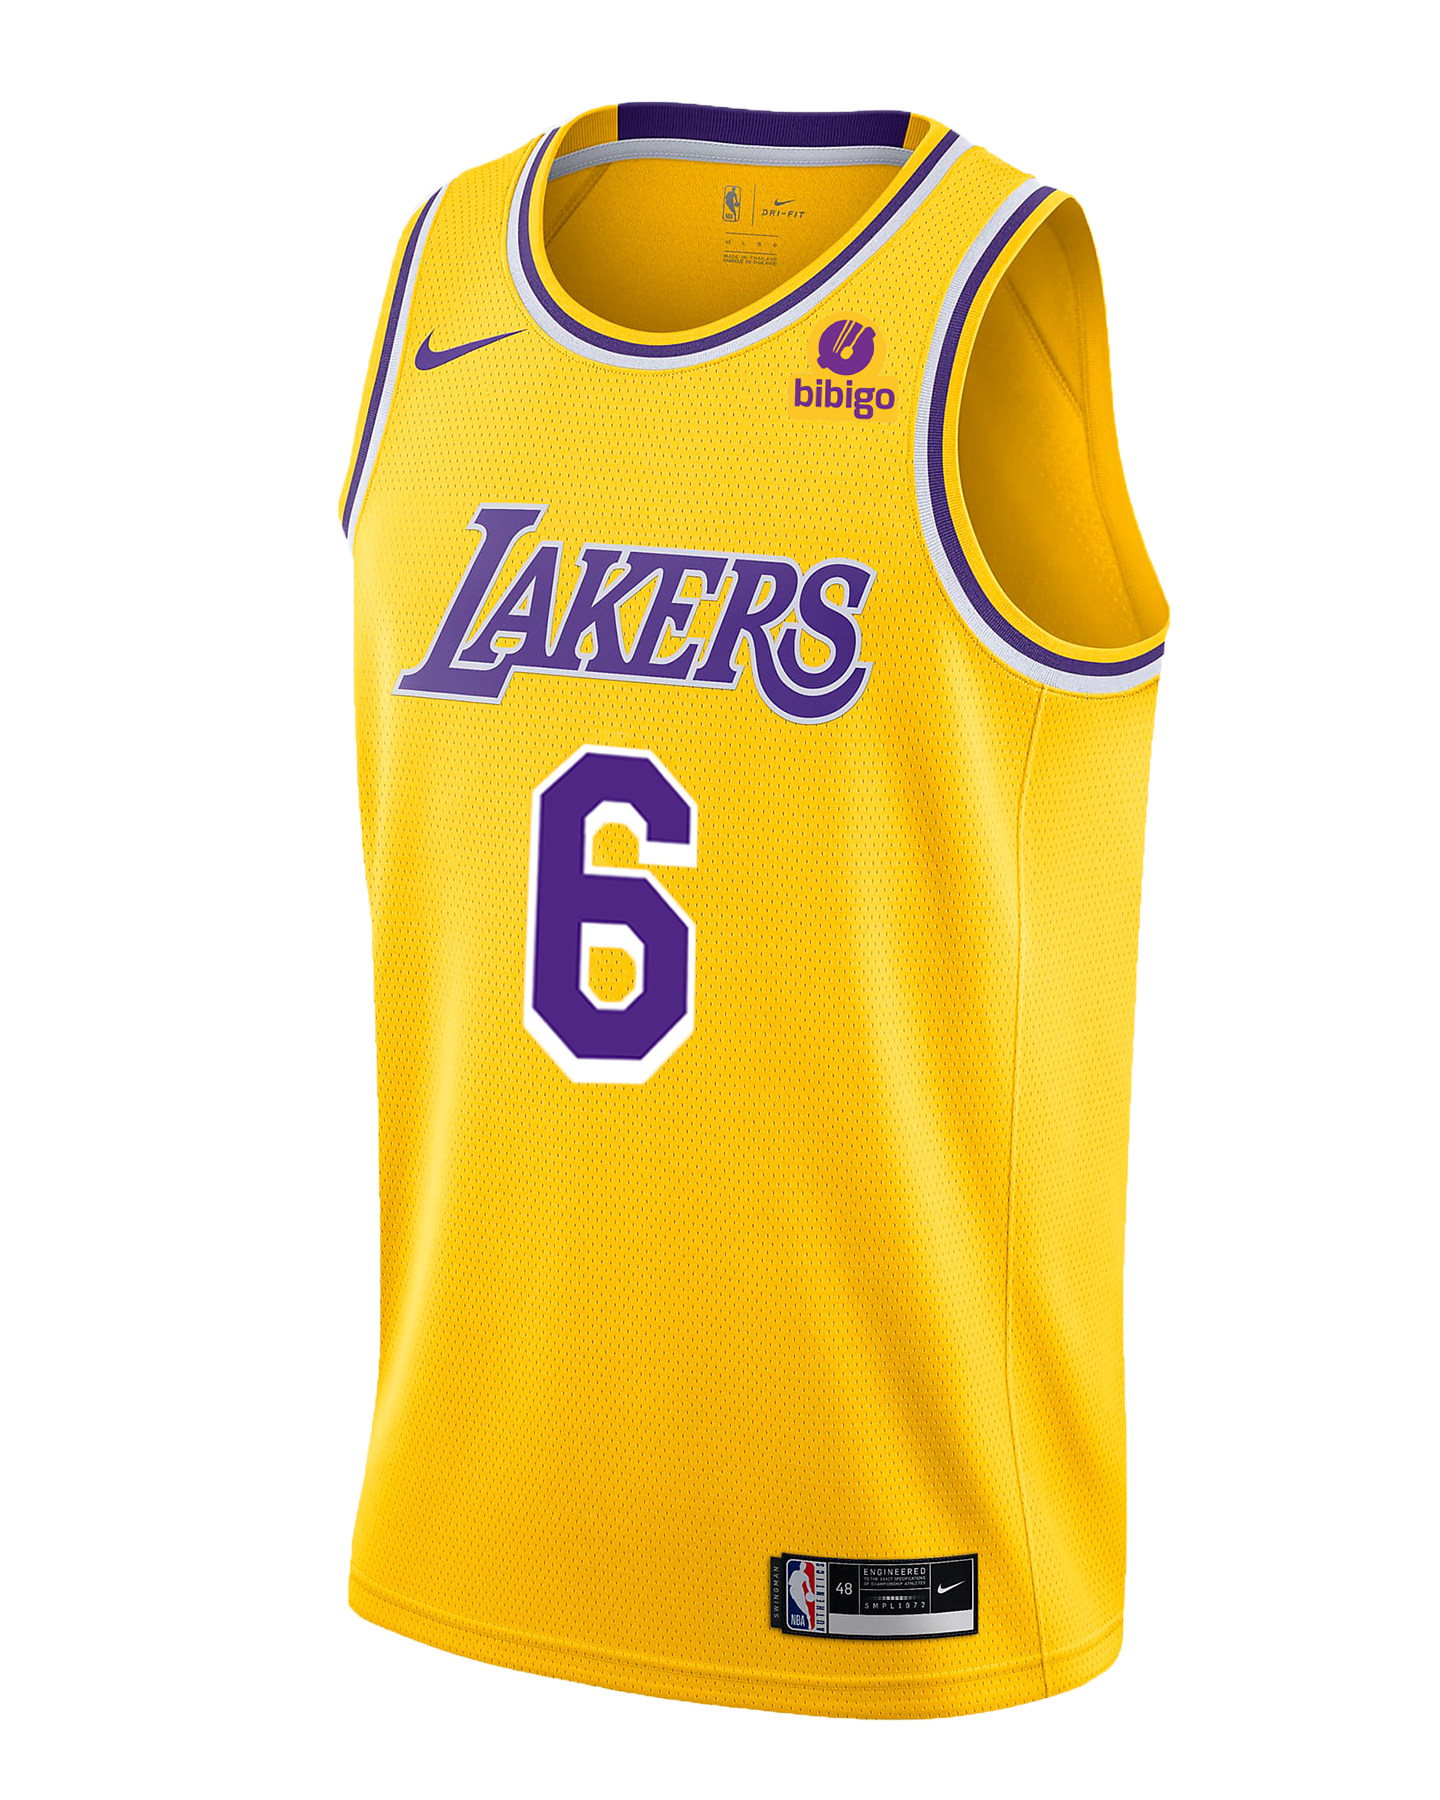 james lakers jersey number